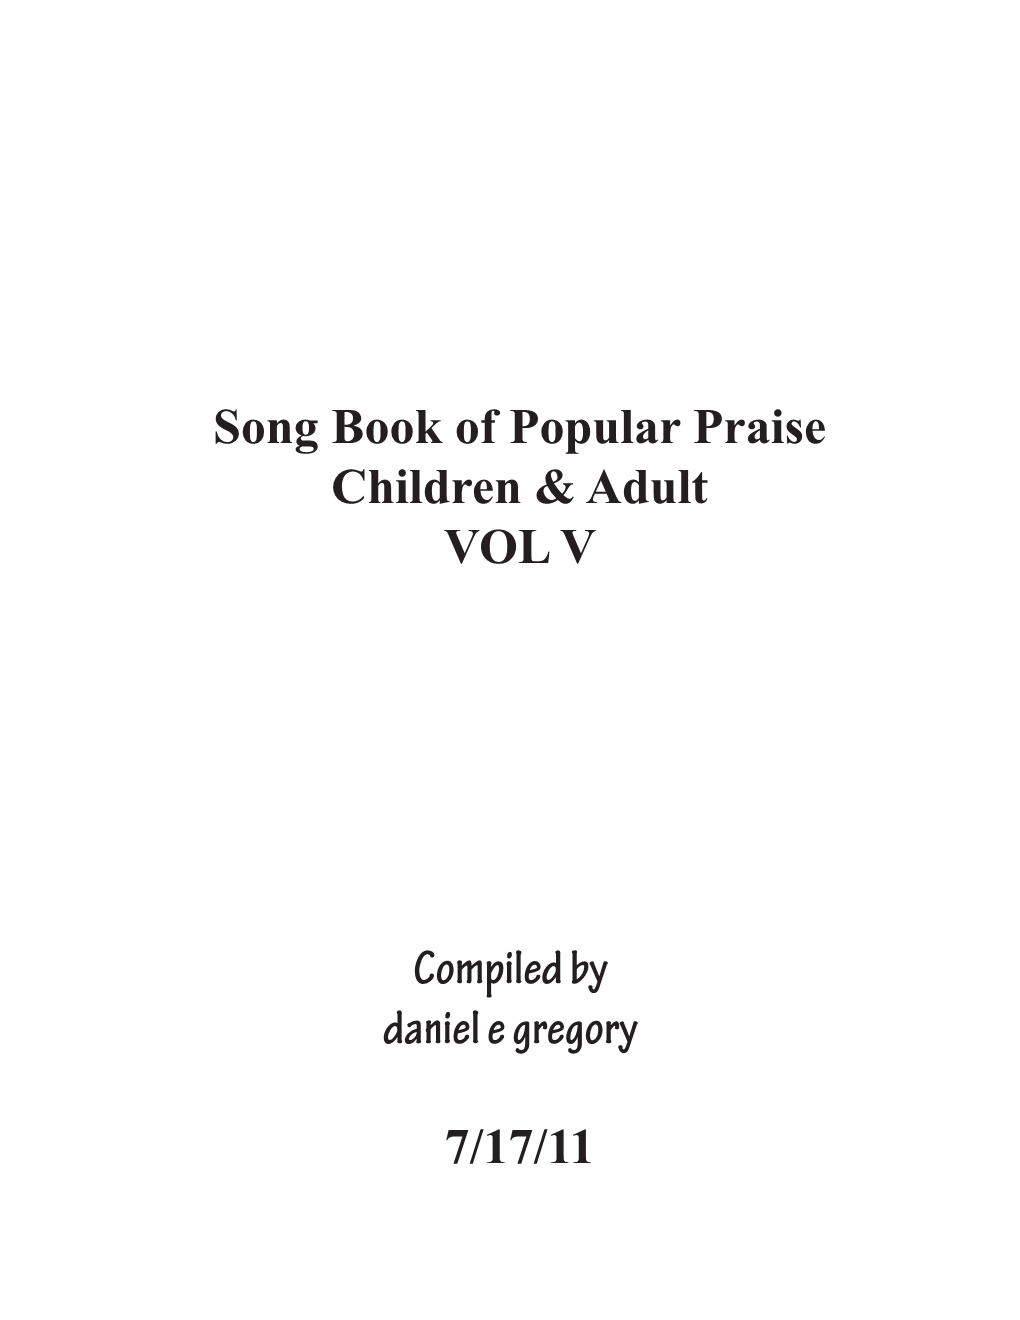 Song Book of Popular Praise Children & Adult VOL V Compiled by Daniel